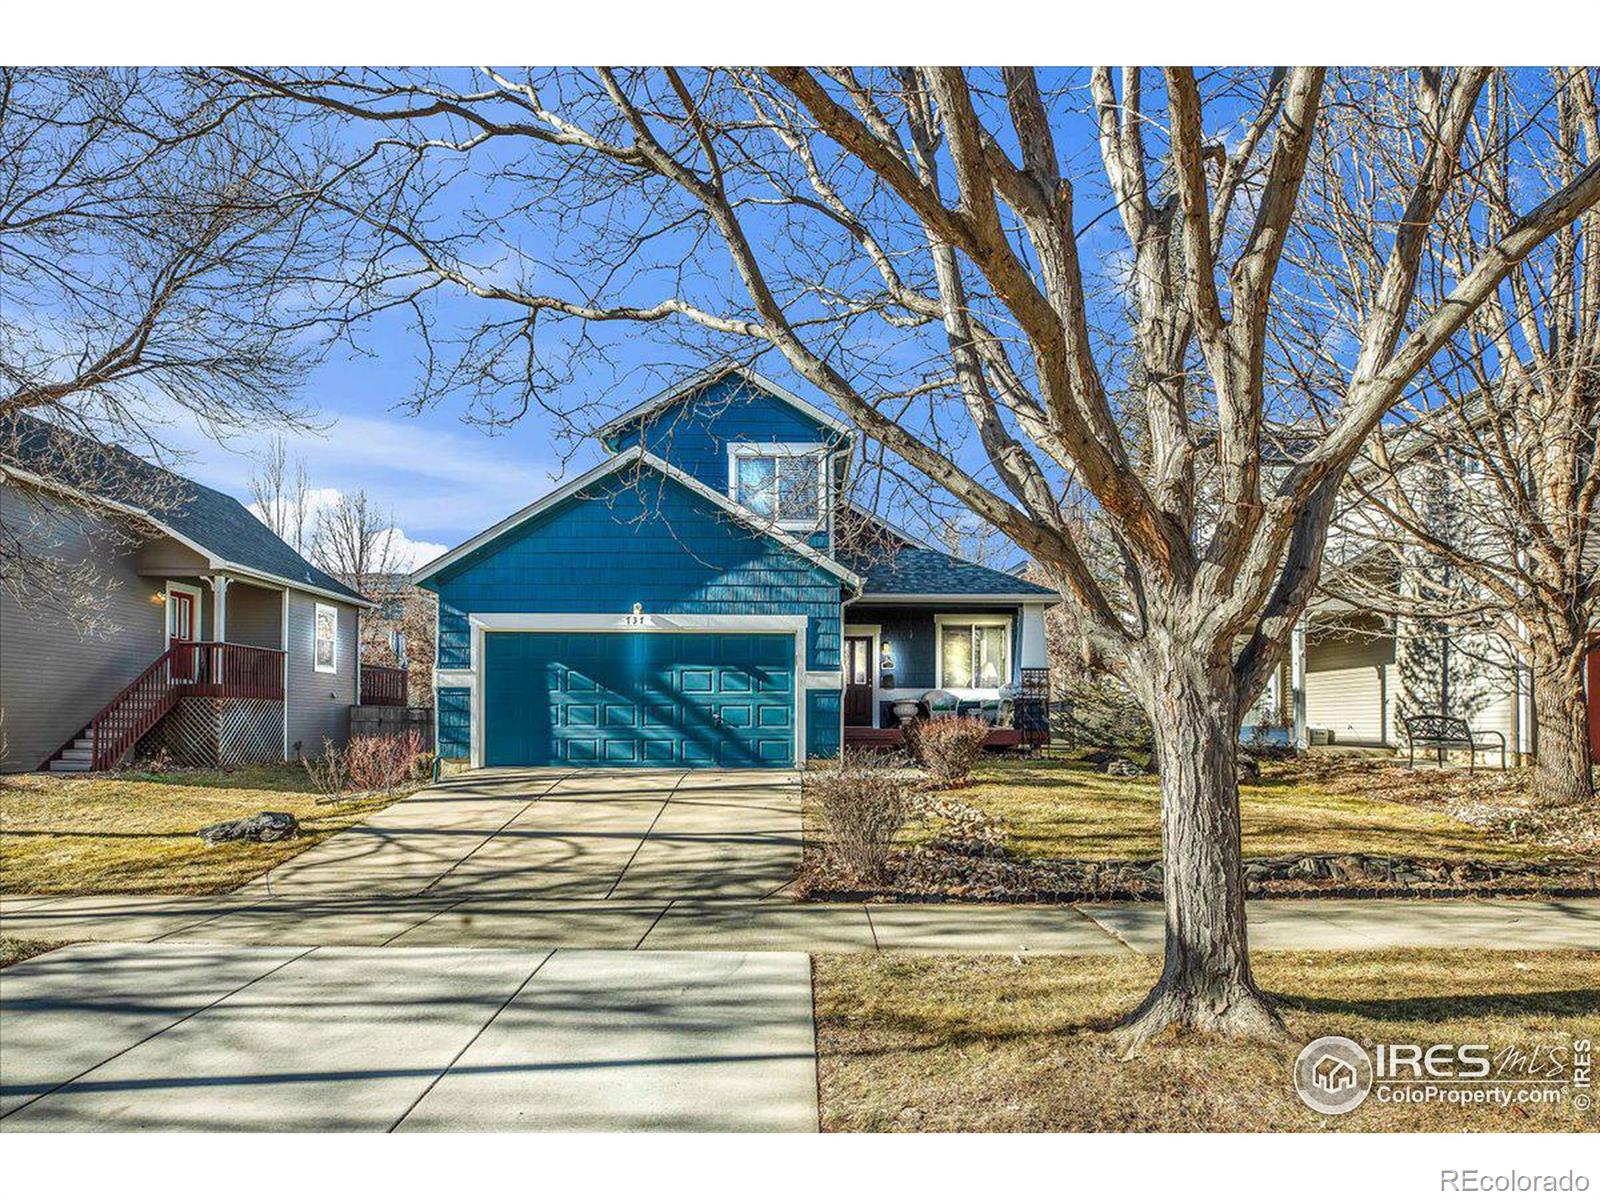 737  arrowood street, Longmont sold home. Closed on 2024-02-23 for $540,000.